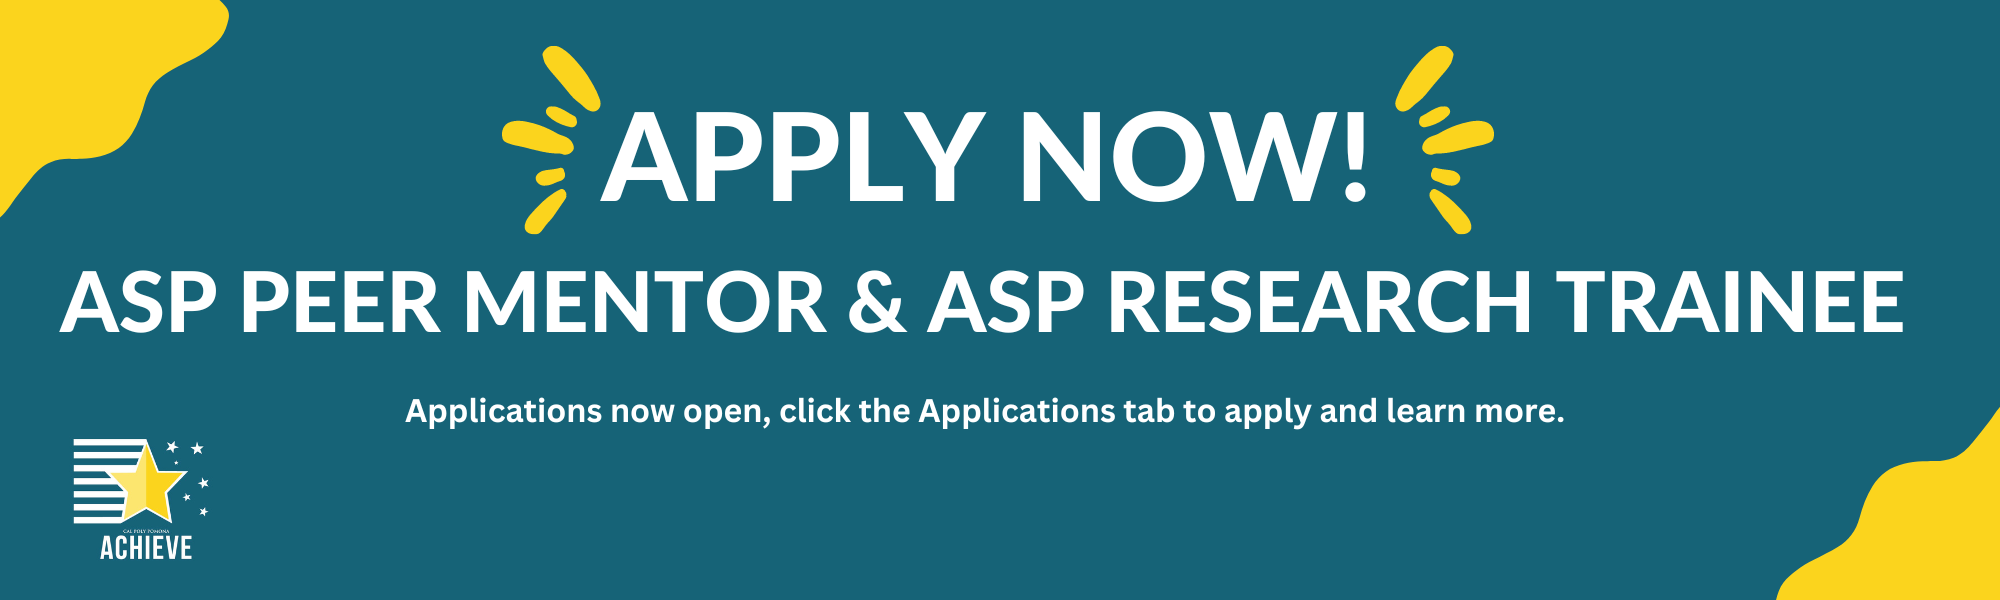 Apply now to be an ASP Peer Mentor or Research Trainee